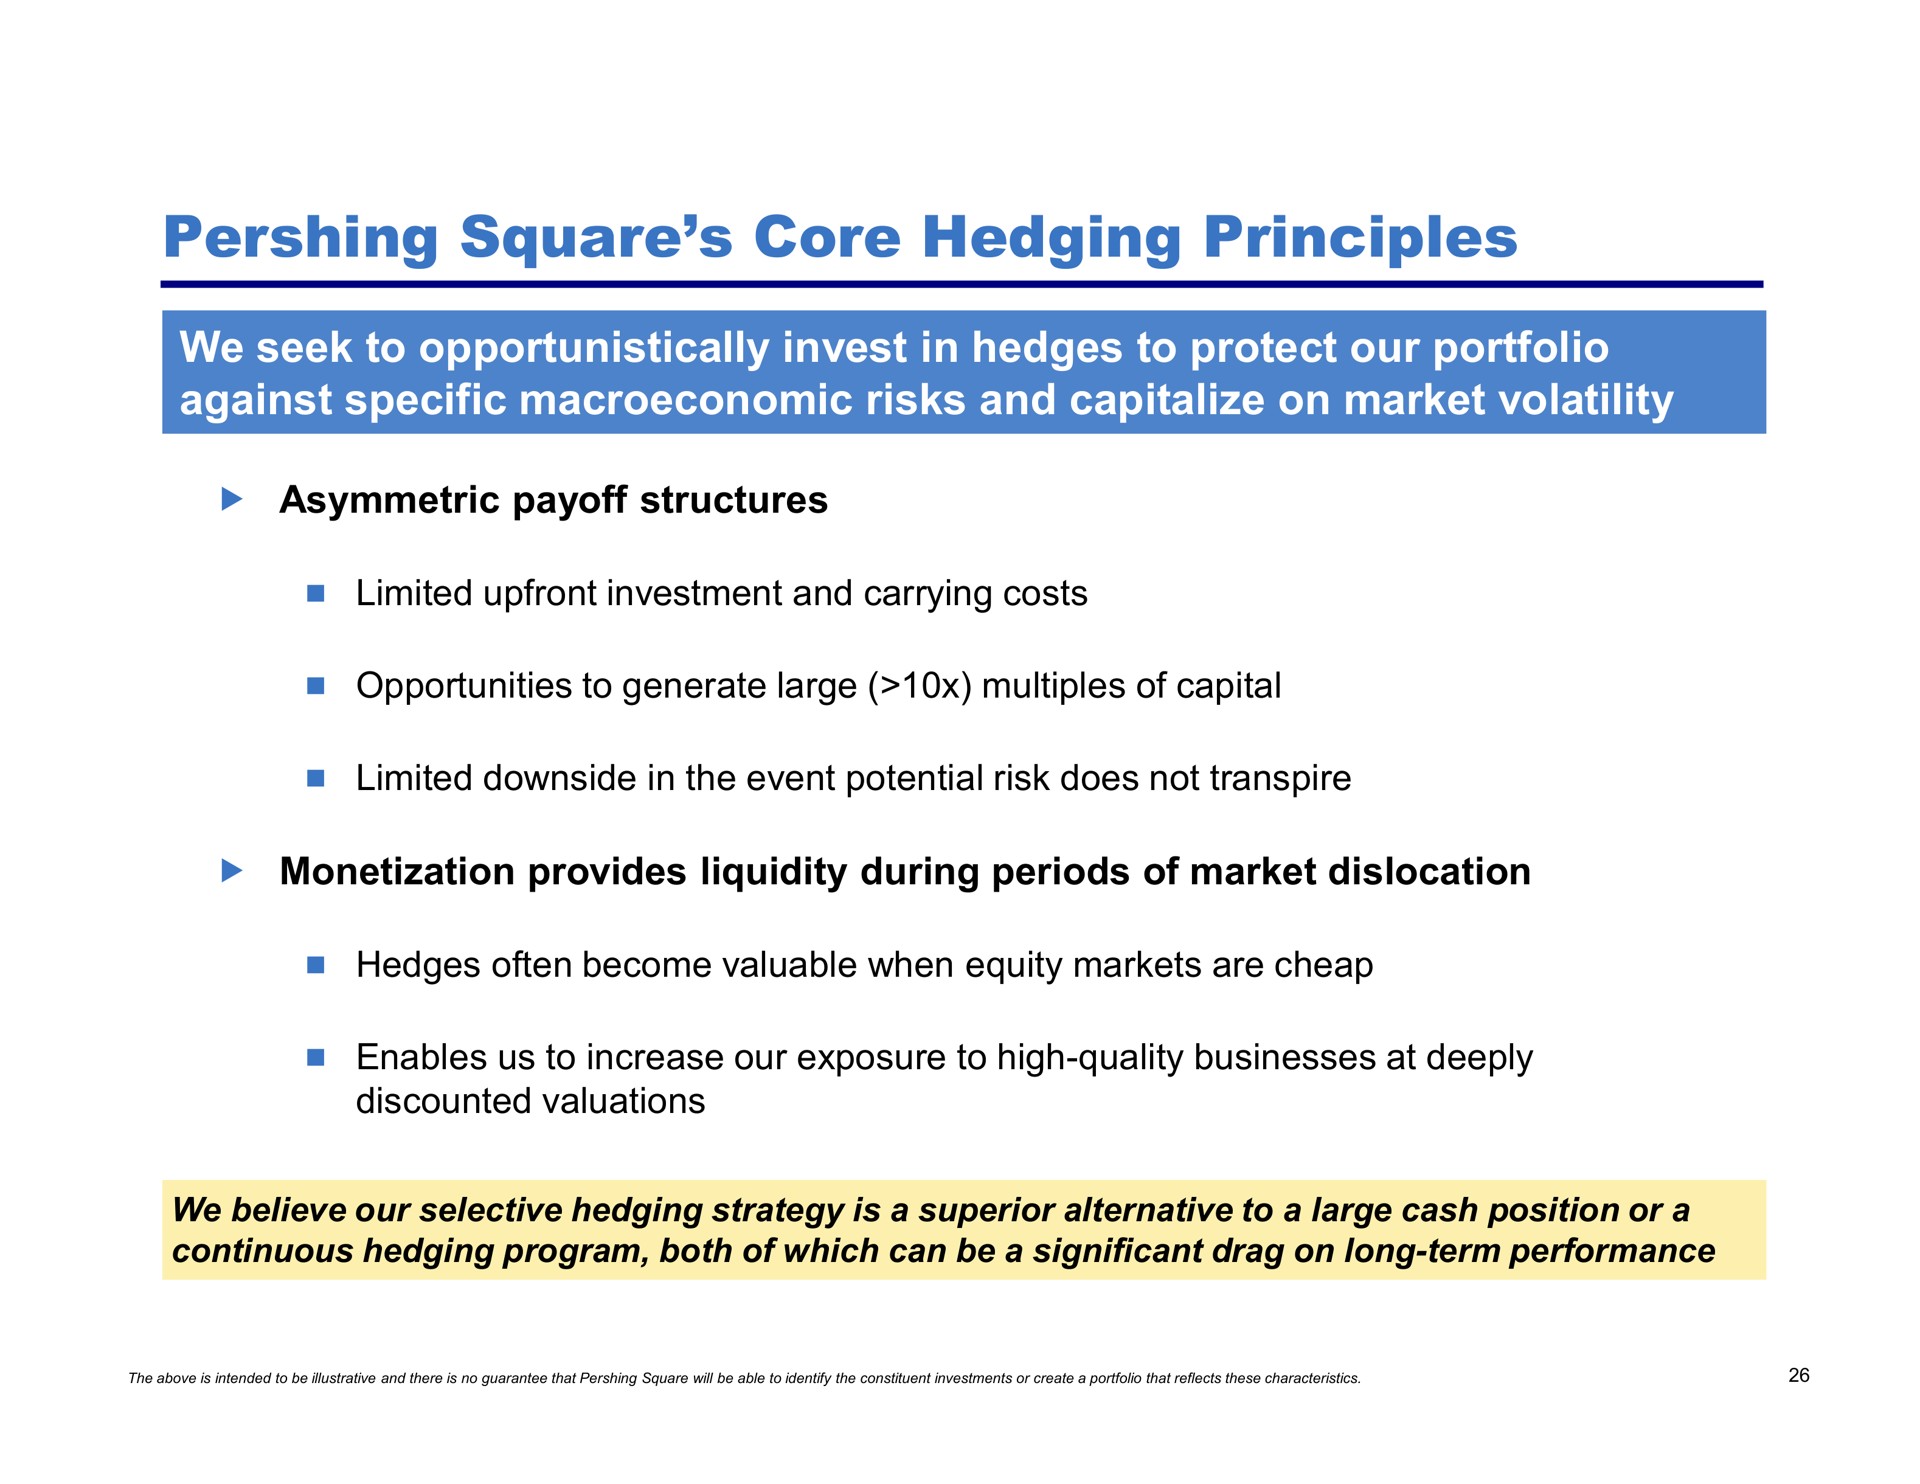 square core hedging principles we seek to opportunistically invest in hedges to protect our portfolio against specific risks and capitalize on market volatility asymmetric payoff structures monetization provides liquidity during periods of market dislocation | Pershing Square